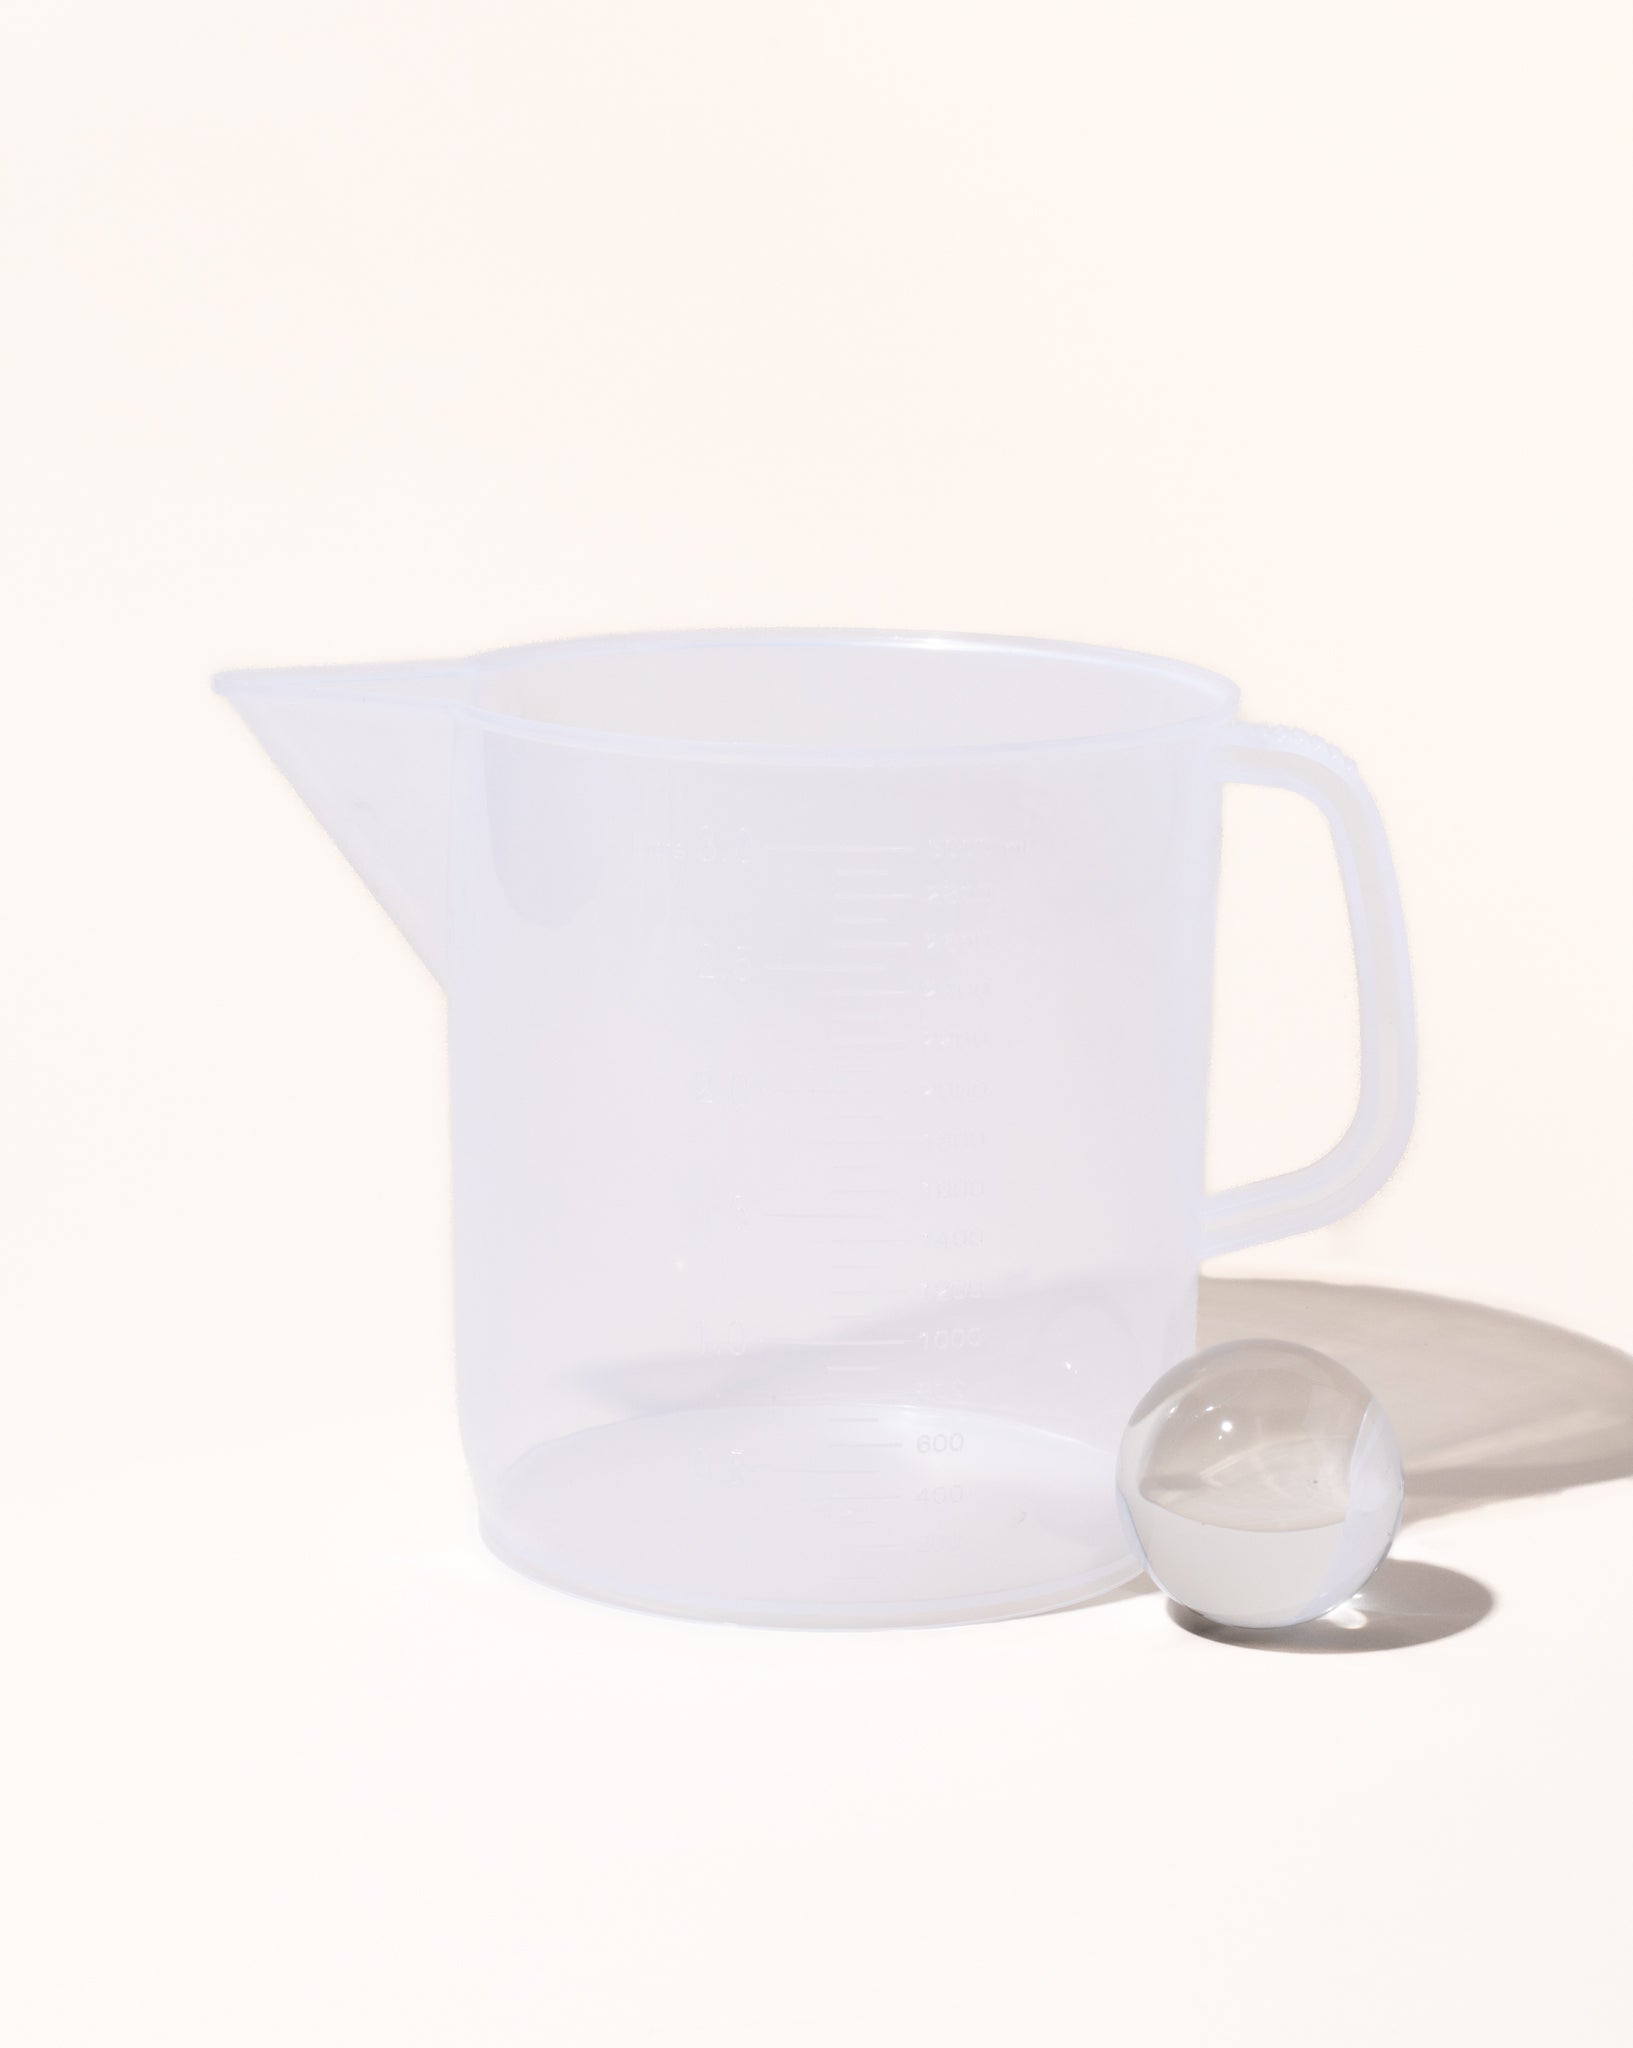 3000ml Pouring Pitcher for Making Candles, Soap, Skincare